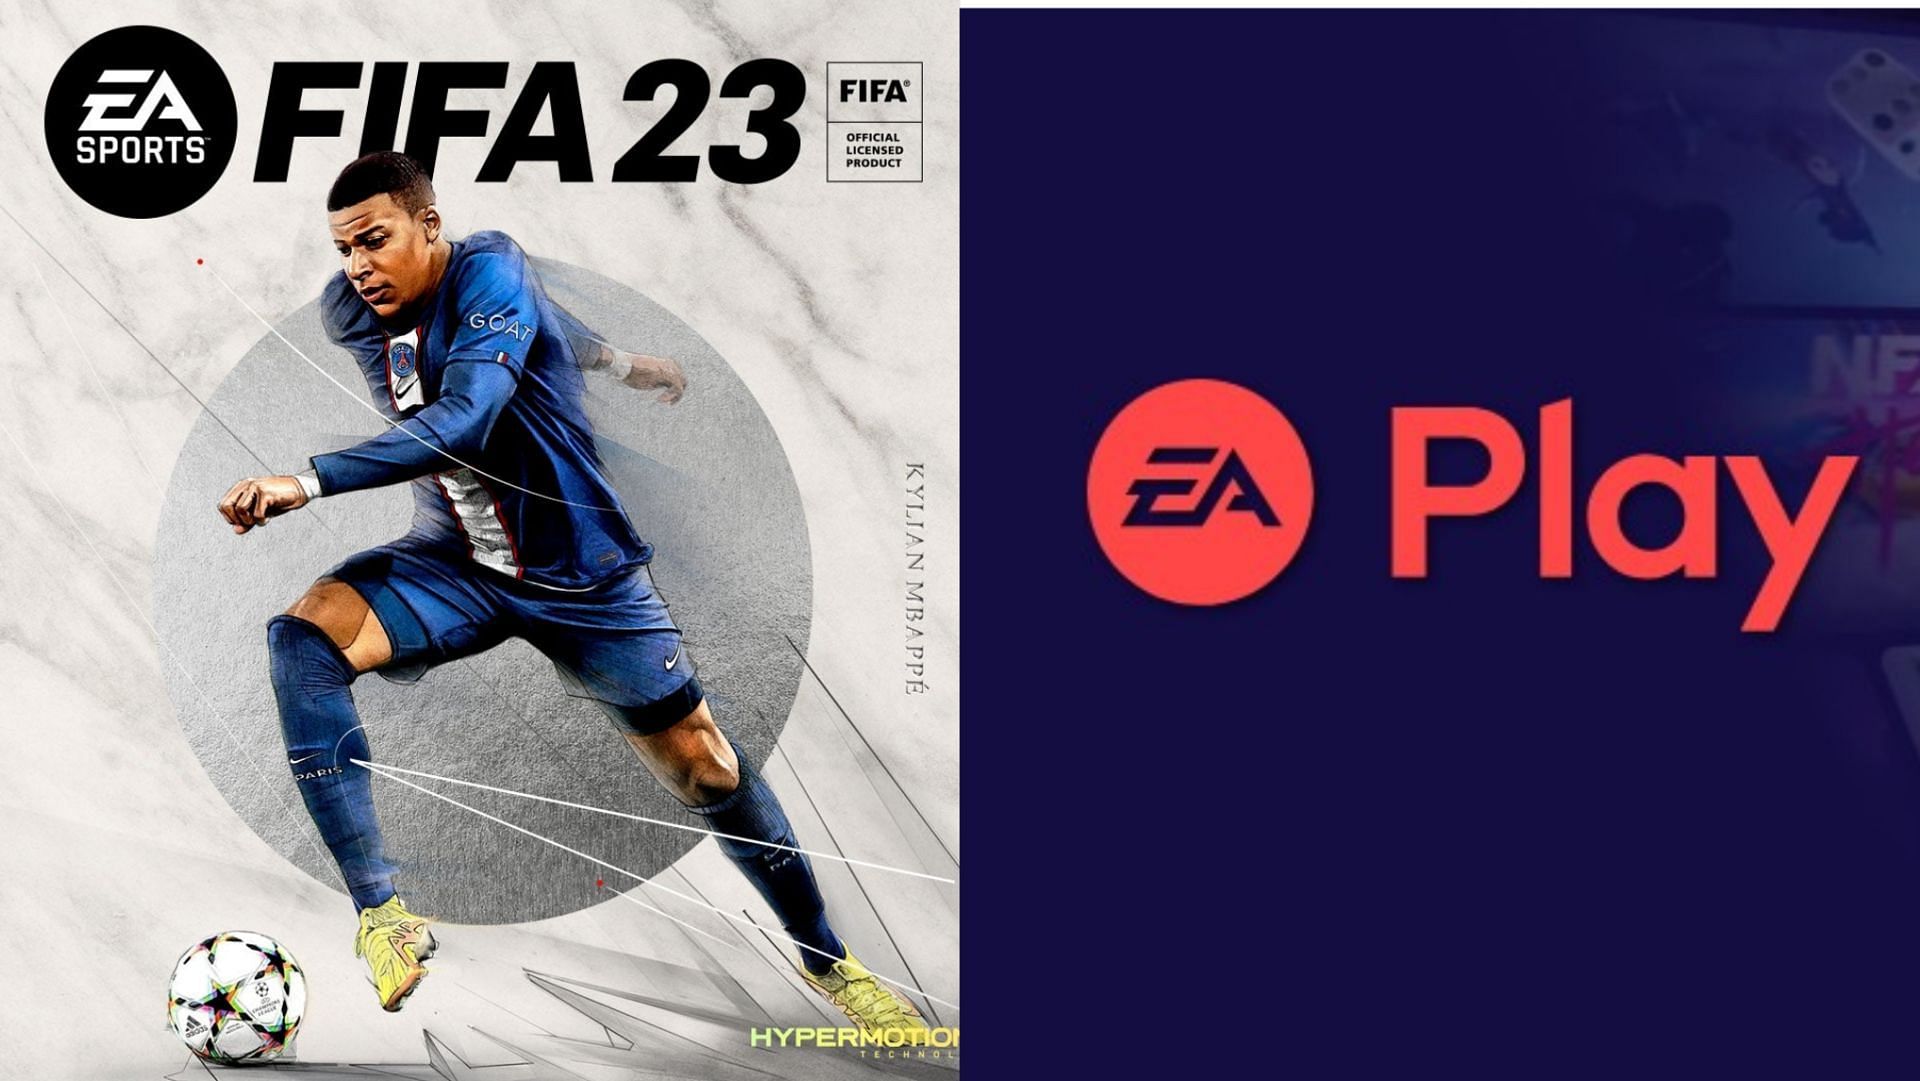 Will FIFA 23 ever go lower than this ? This promotional offer is strange  considering that Steam's Winter Sale is going live on the 22nd and that's  when this offer ends .